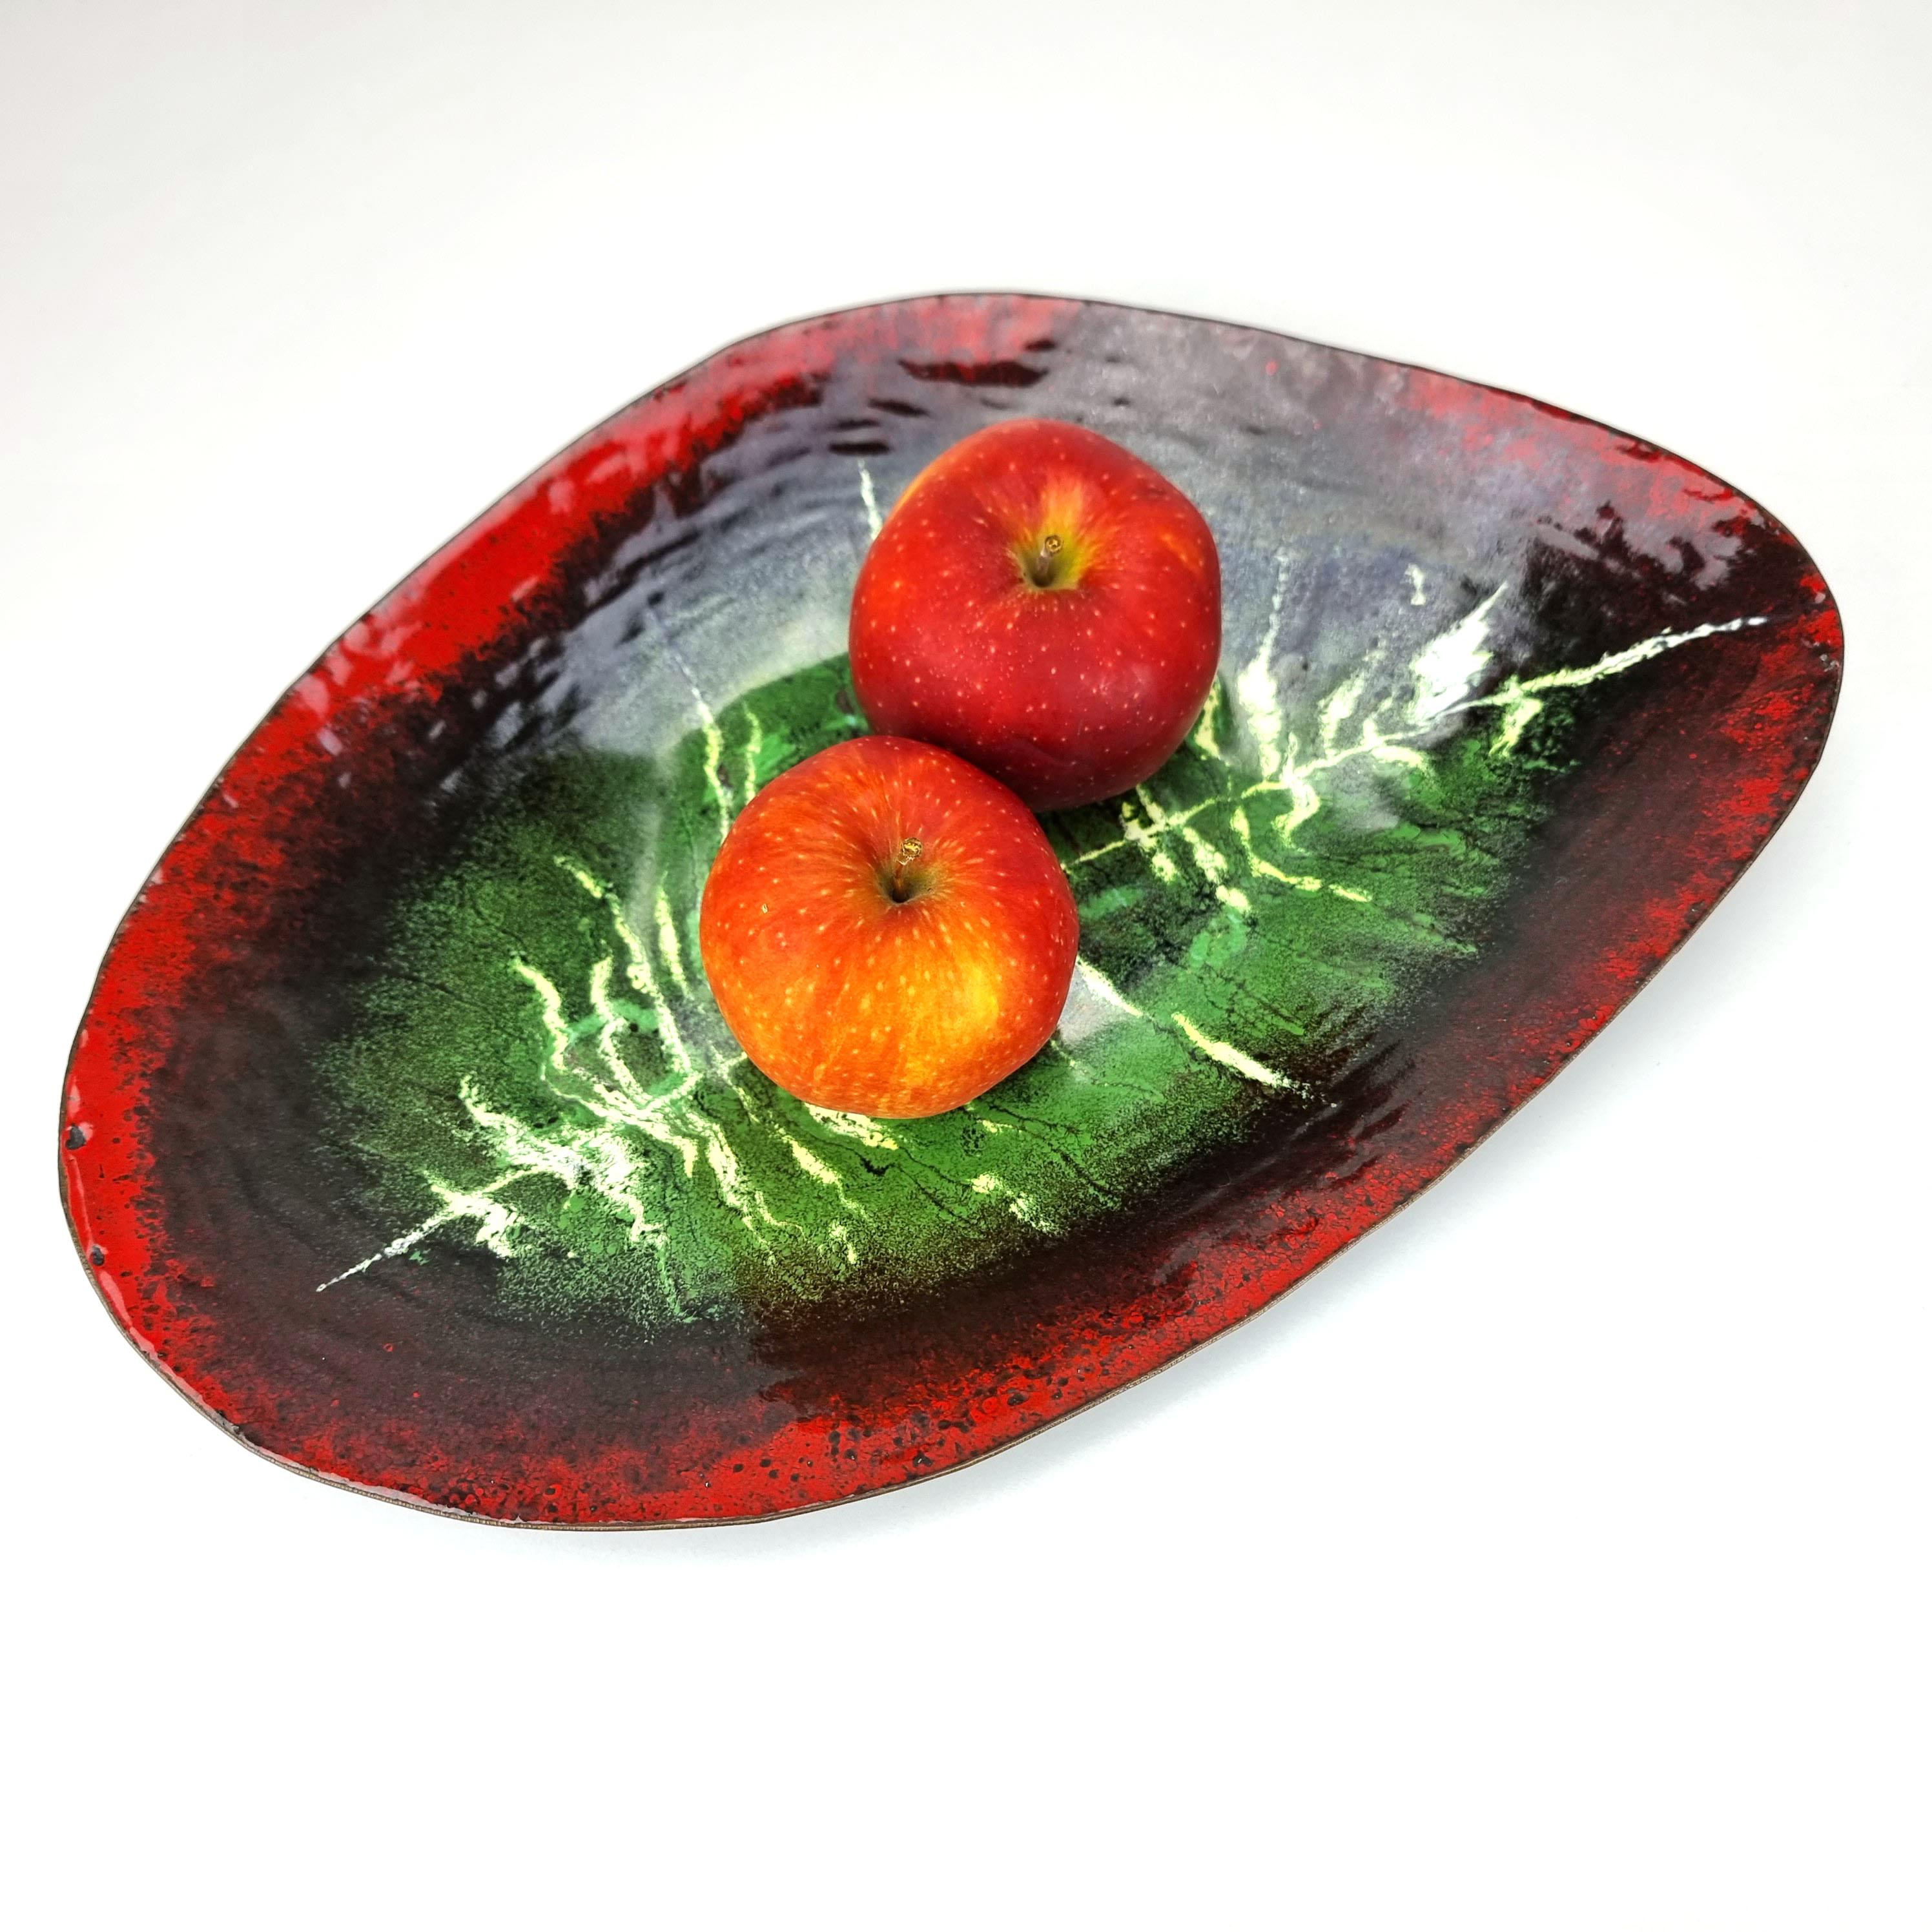 Vintage handcrafted organic shaped enamel bowl or centerpiece attributed to Paolo De Poli. This is a stunning piece of Italian craftsmanship, with a beautiful green, black, and red enamel decorated with abstract pattern in center that resembles a